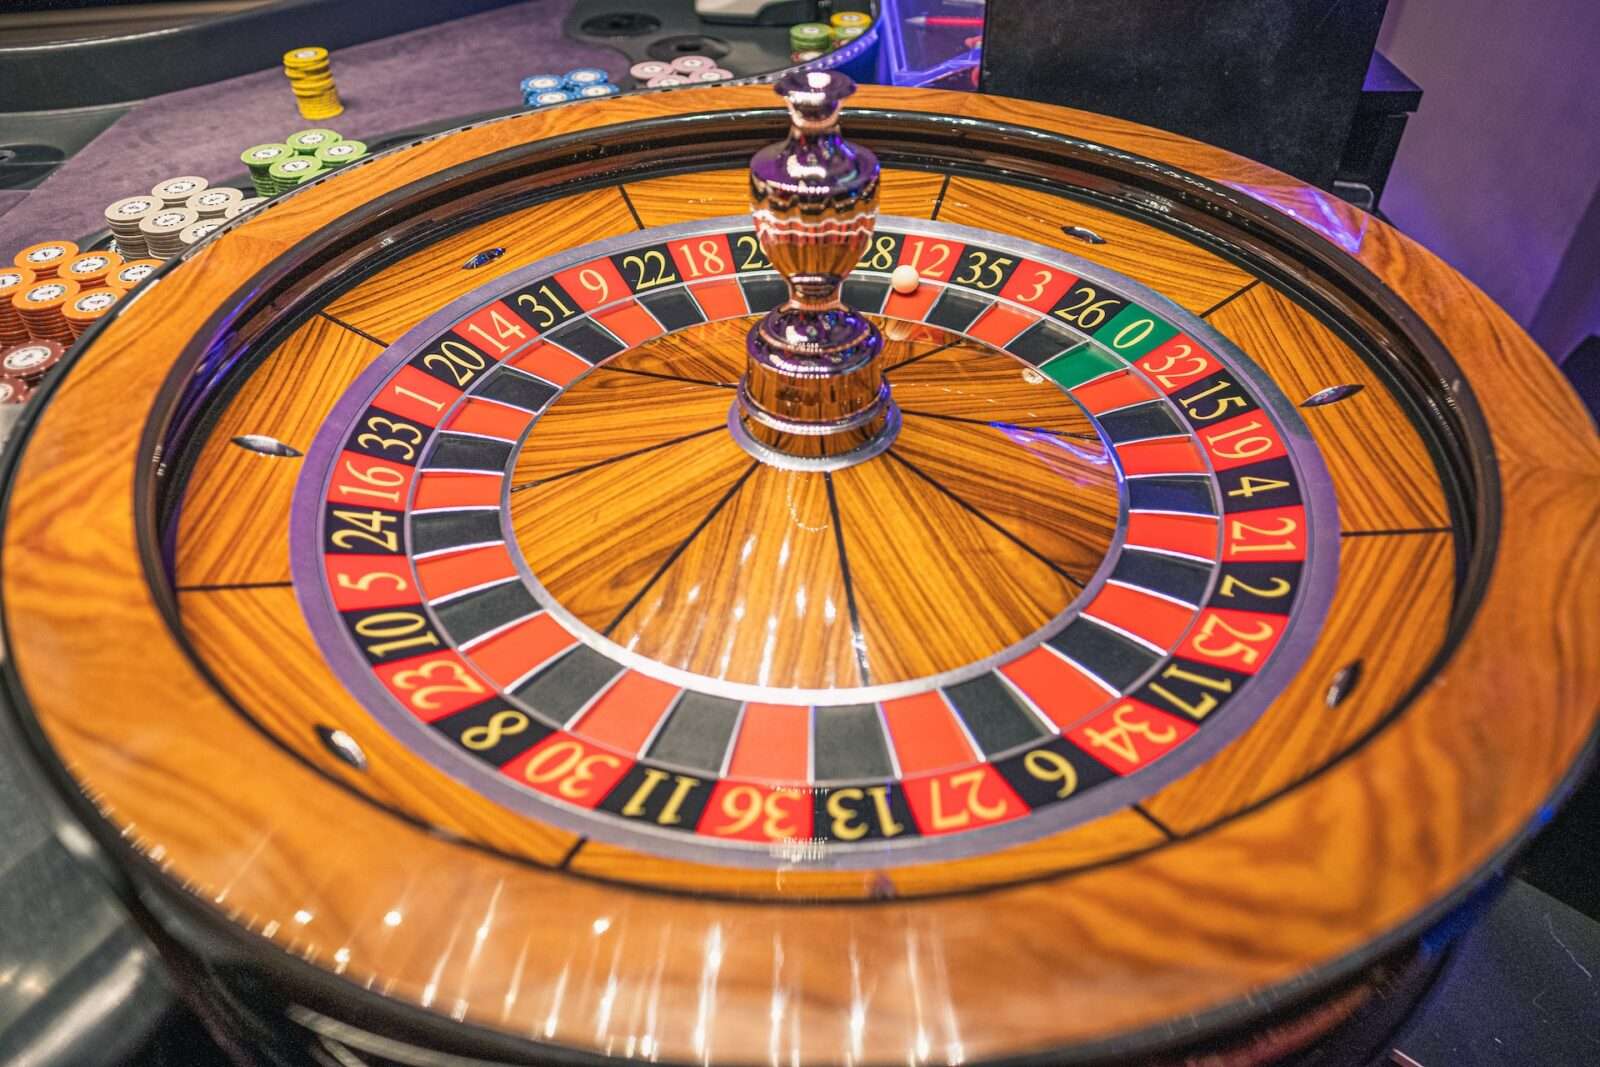 Roulette: The Wheel of Fortune